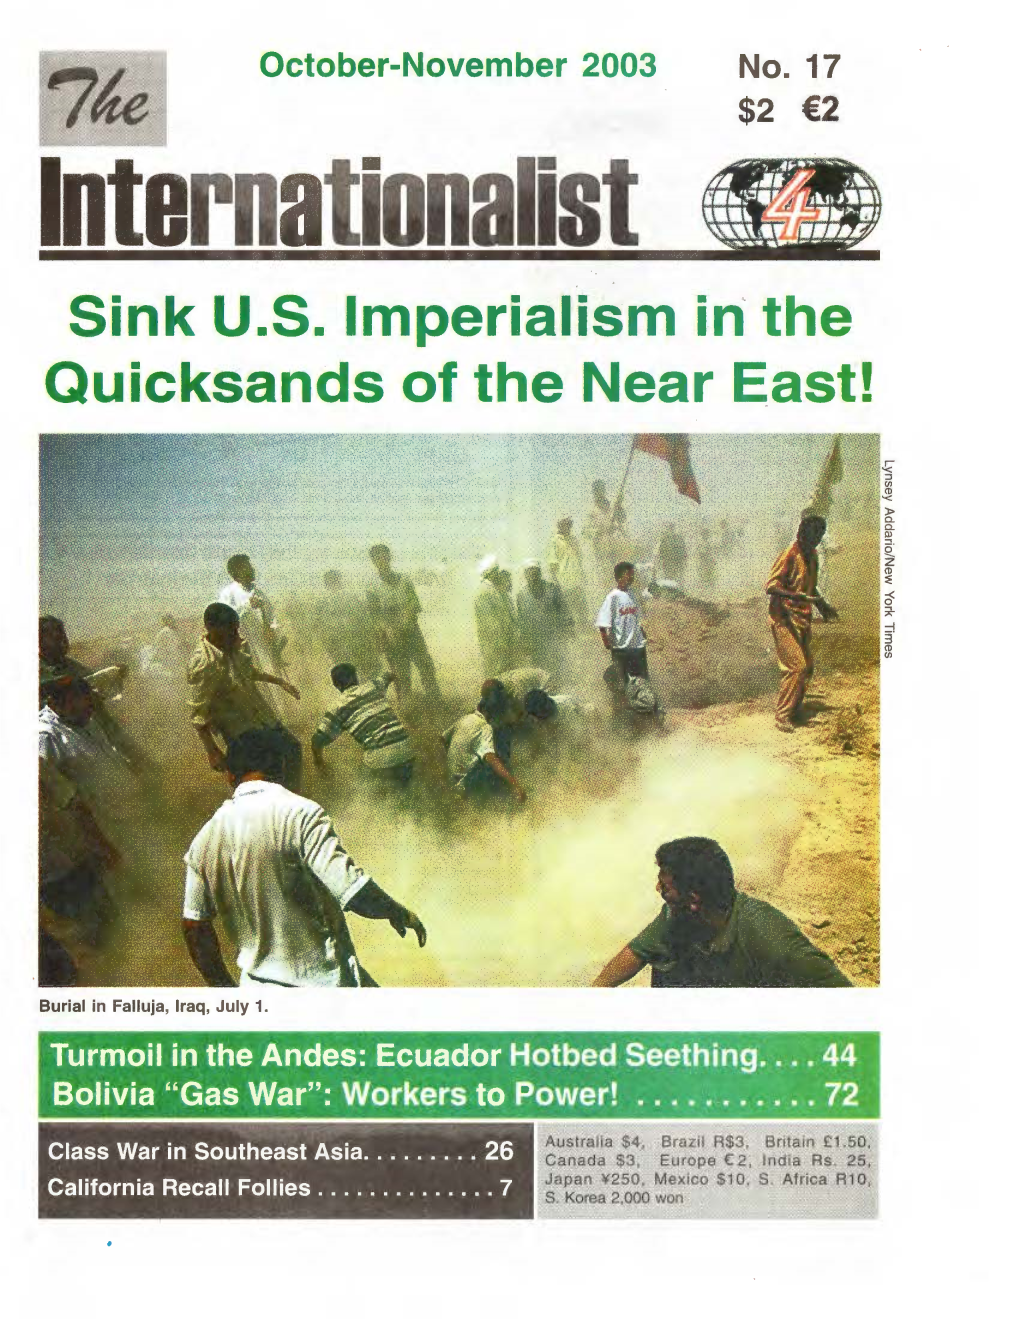 Sink U.S. Imperialism in the Quicksands of the Near East!